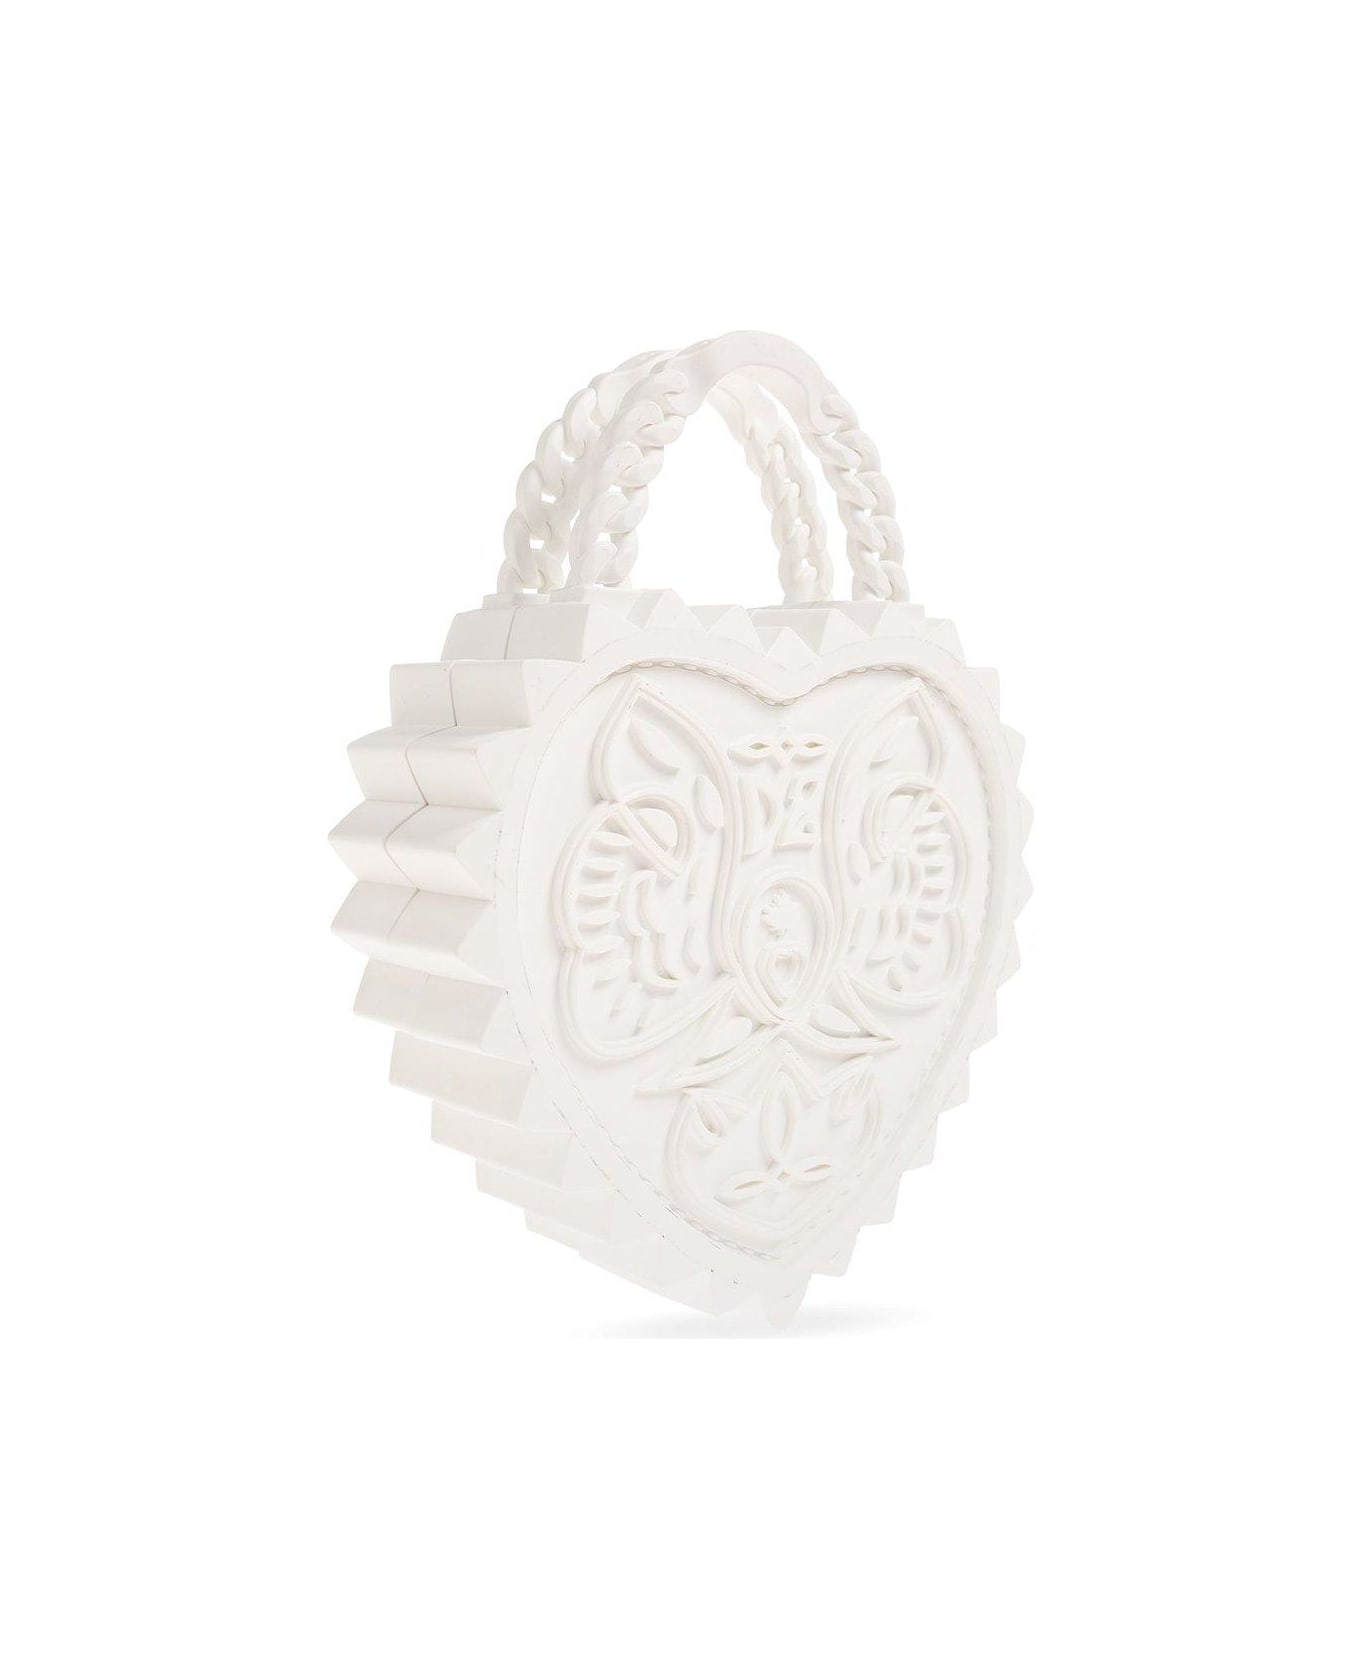 Dsquared2 Open Your Heart Top Handle Bag - Bianco トートバッグ